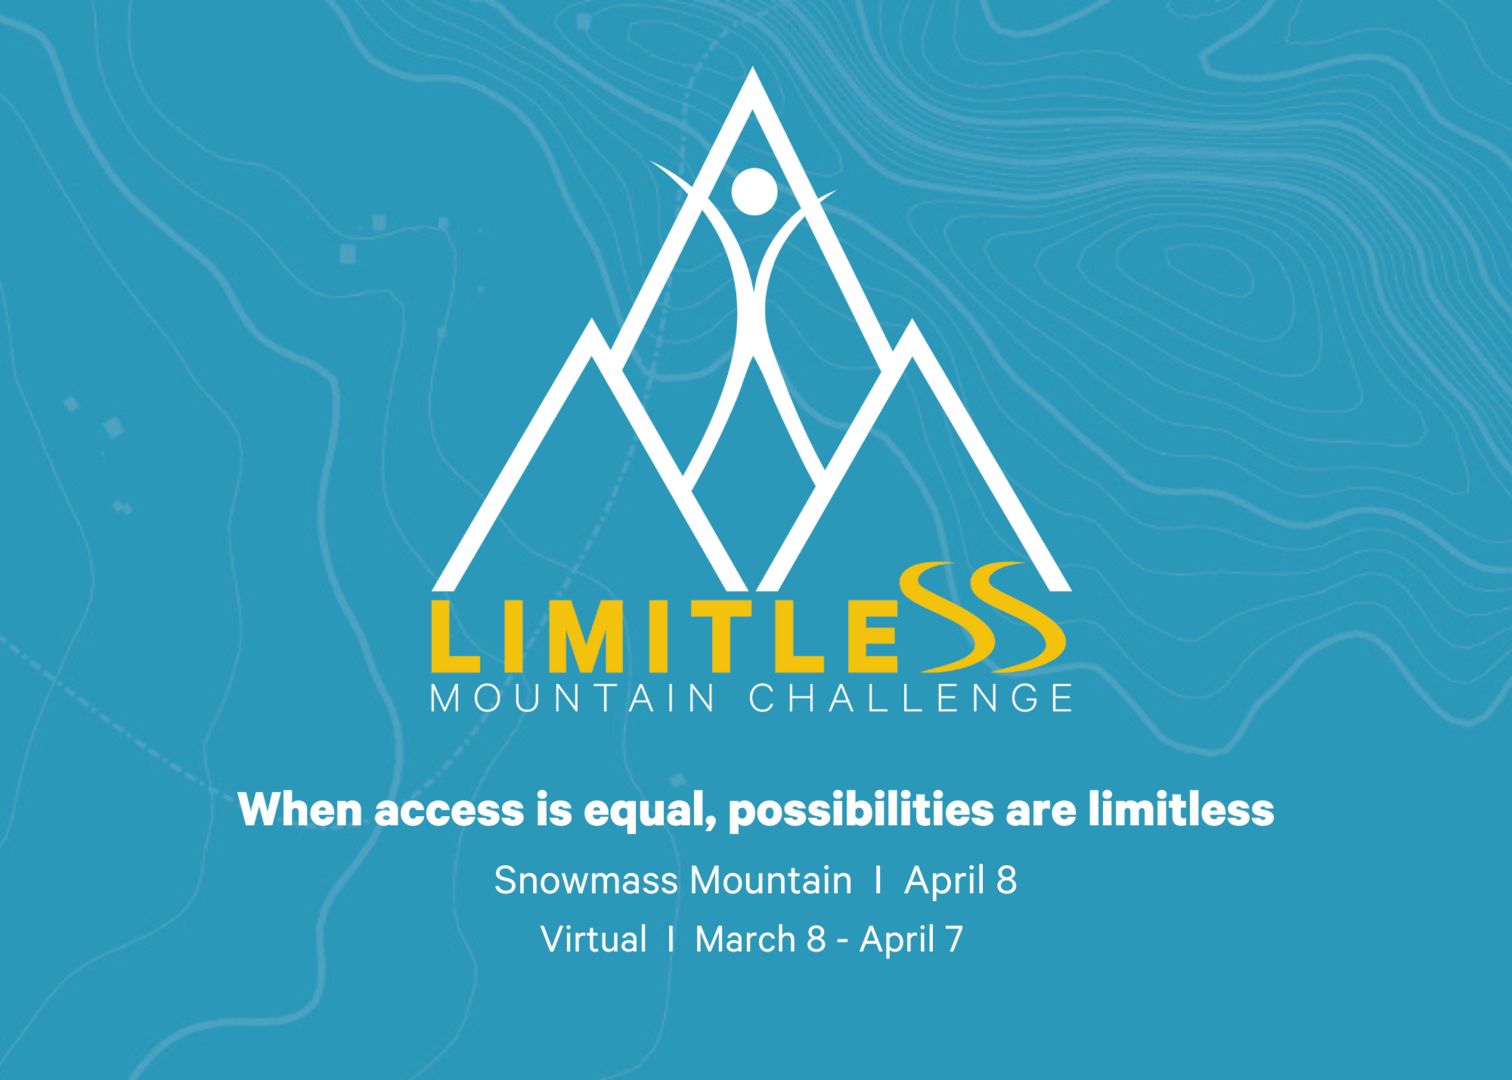 Limitless Mountain Challenge, Snowmass Village, Colorado, United States